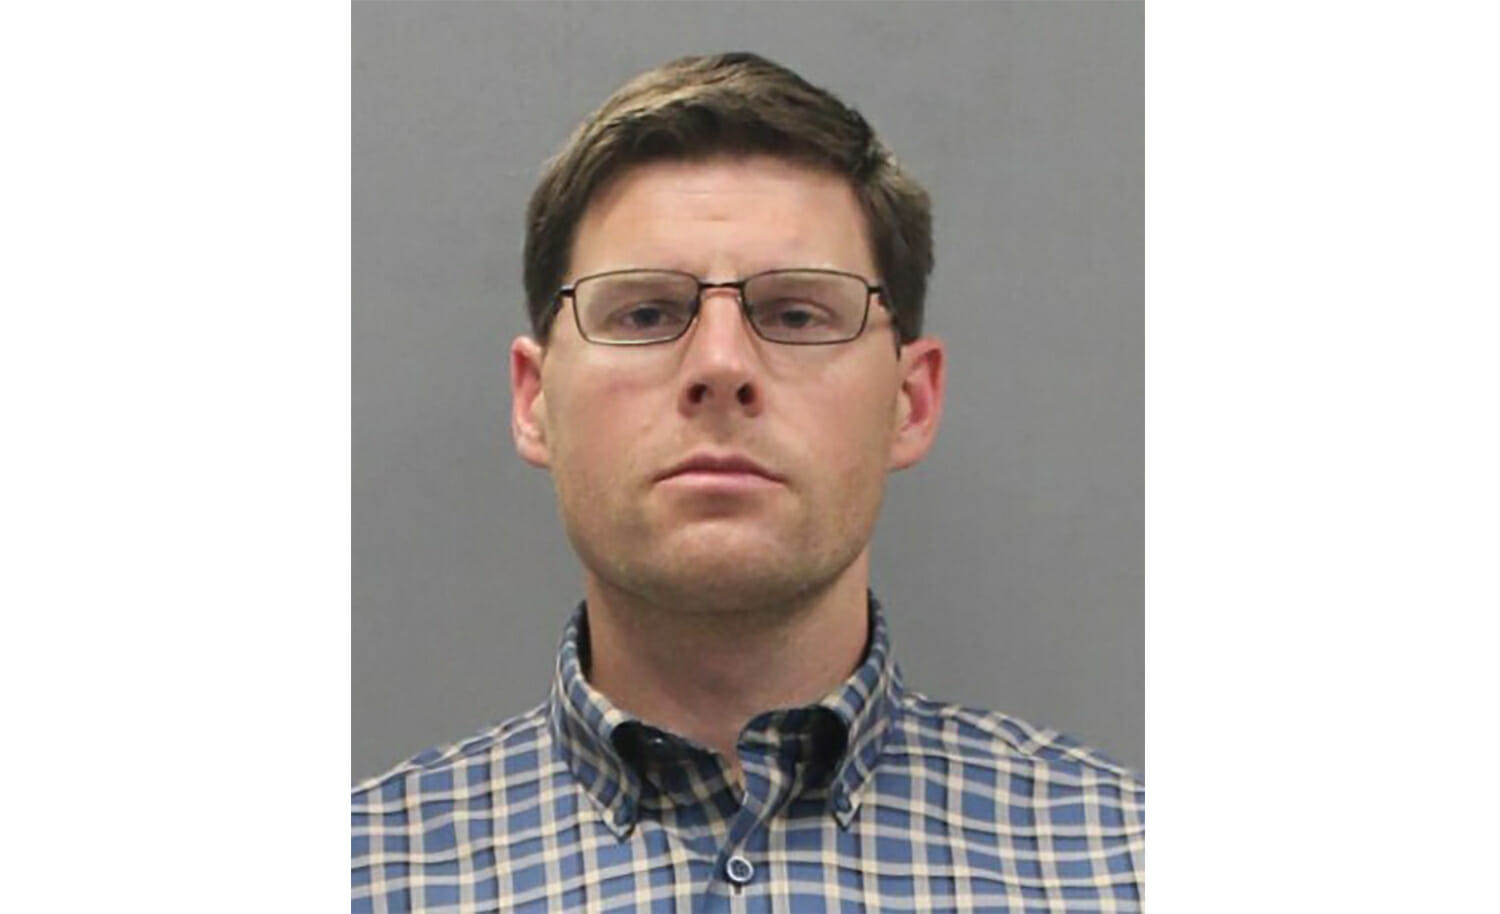 This undated photo provided by the Southwest Virginia Regional Jail Authority shows Dr. Joel Smithers. Smithers is facing the possibility of life in prison after being convicted in May of more than 800 counts of illegally prescribing drugs, including oxycodone and oxymorphone that caused the death of a West Virginia woman.